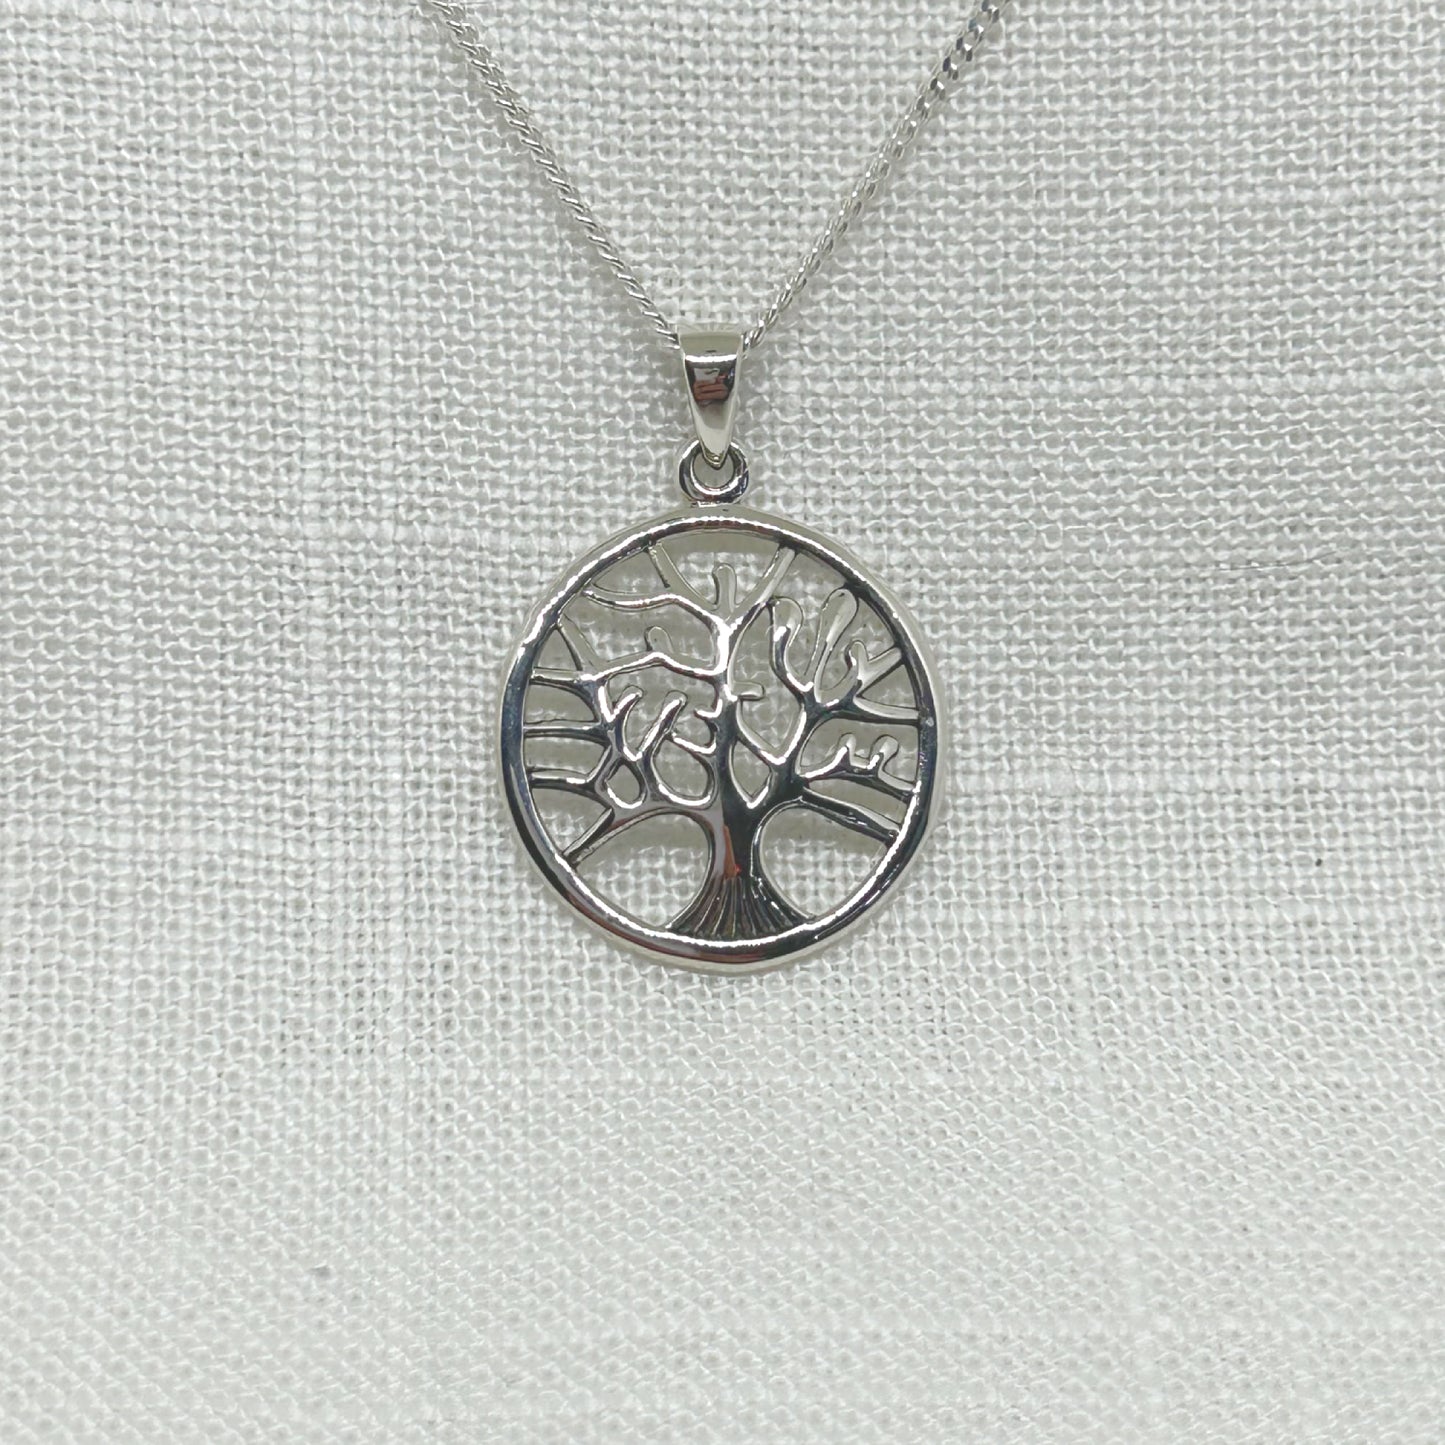 This beautiful tree of life pendant is slightly convex with a high polish, giving it a great finish. The large detailed tree sits within an outer circle. The size of the pendant is approx under 2.4cm wide & 3cm long incl the bale. Comes complete on a 20 inch sterling silver chain and is gift boxed.